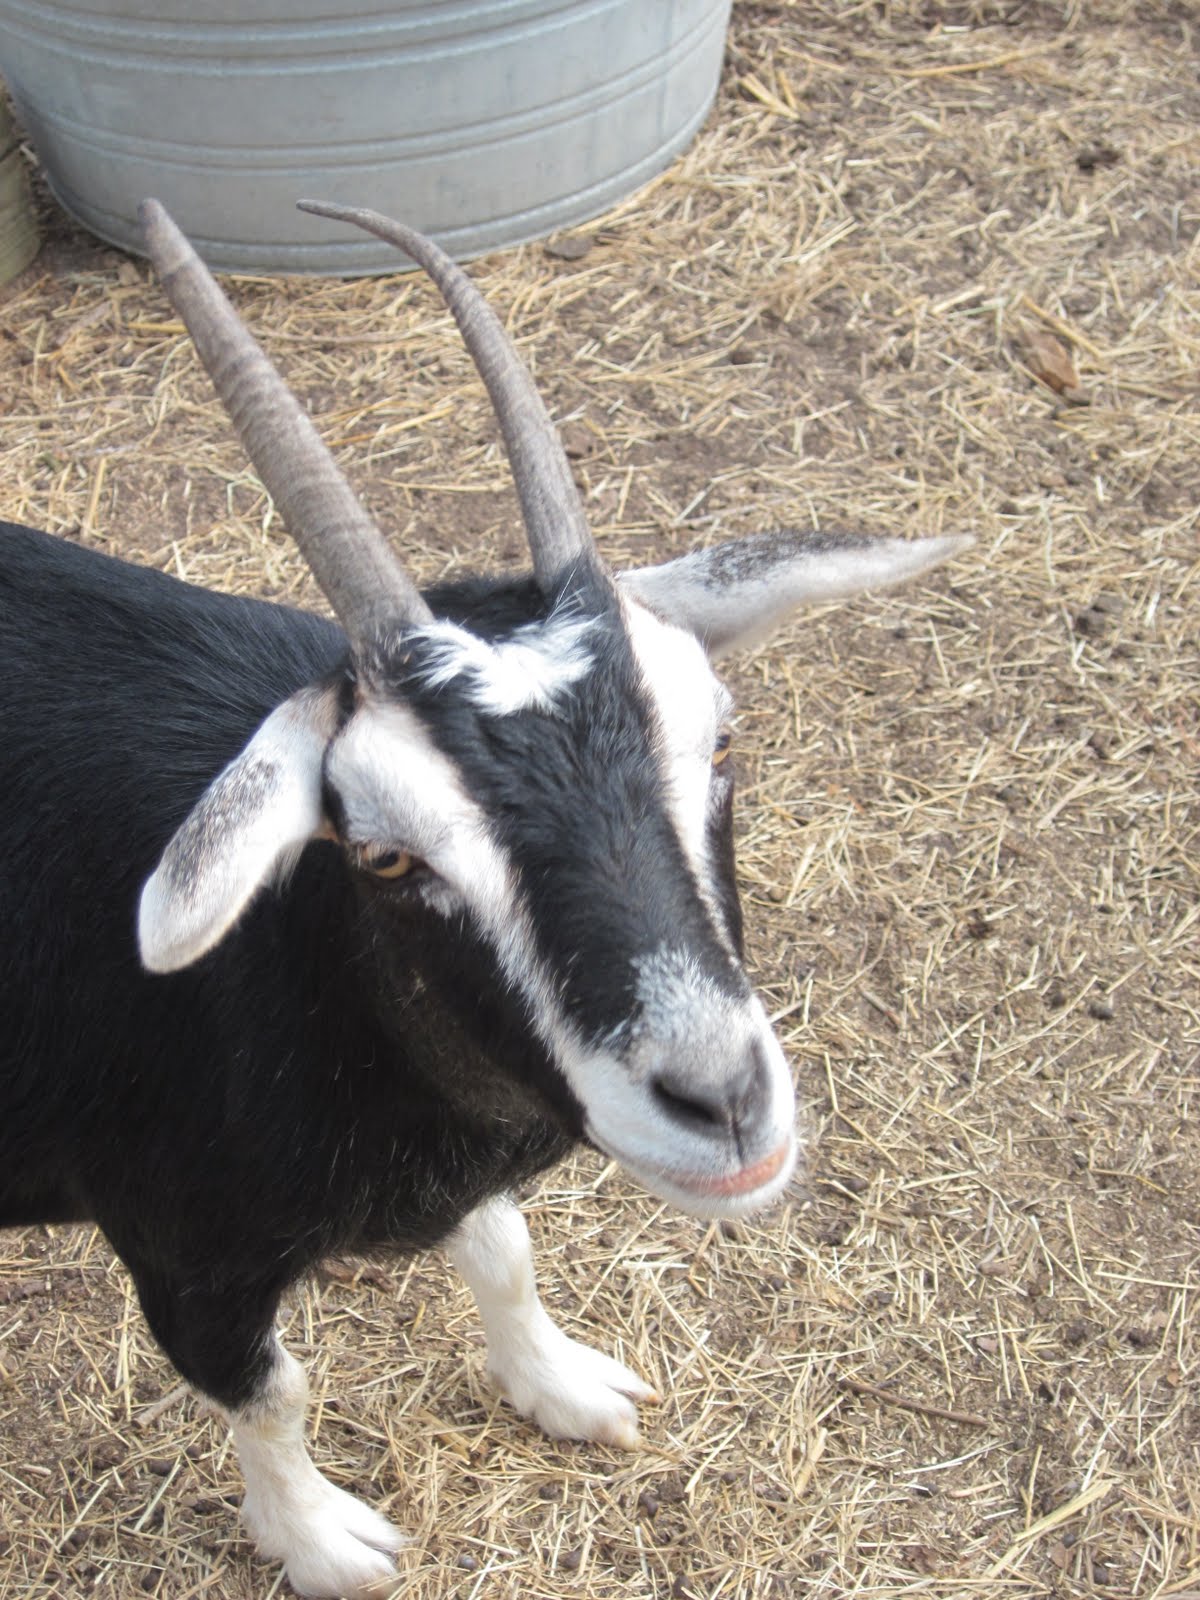 Horns on Goats….to be or not to be?